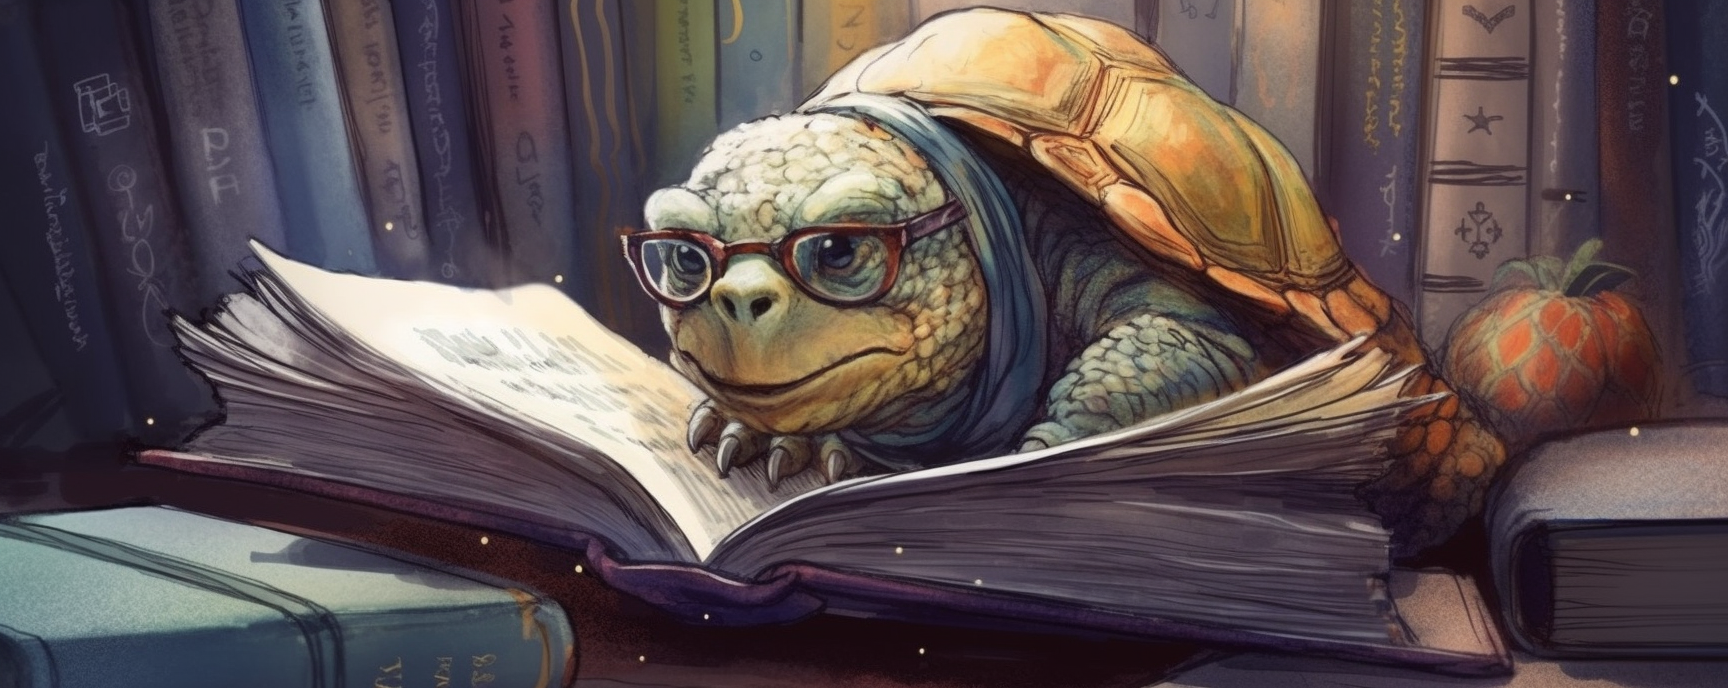 An_old_tortoise_wearing_reading_glasses_is_reading_a_book